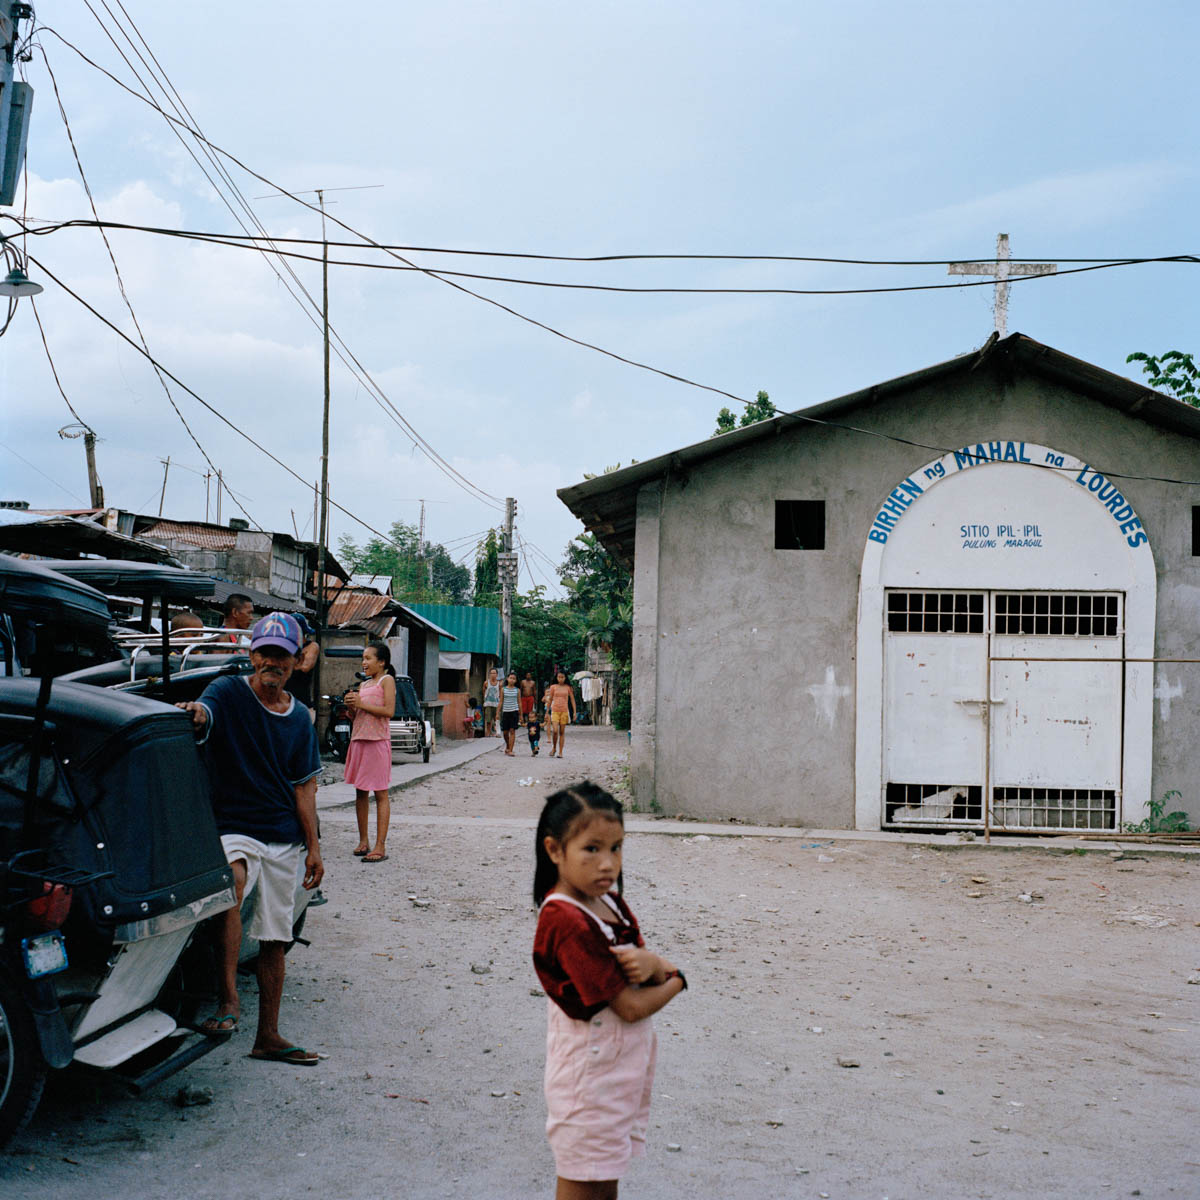 Barangay  - Typical view, as a diptych, of Ipil-Ipil, a barangay (neighbourhood) surrounding Angeles City. Most of the sex-workers live in these areas. Angeles City, Philippines, August 2014. - Copyright © © S. Borcard - N. Metraux - Angeles - Central Luzon - Philippines - <A href="https://maps.google.com/?ll=15.168055,120.586388&z=16" target="_blank">(Map Barangay )</A>